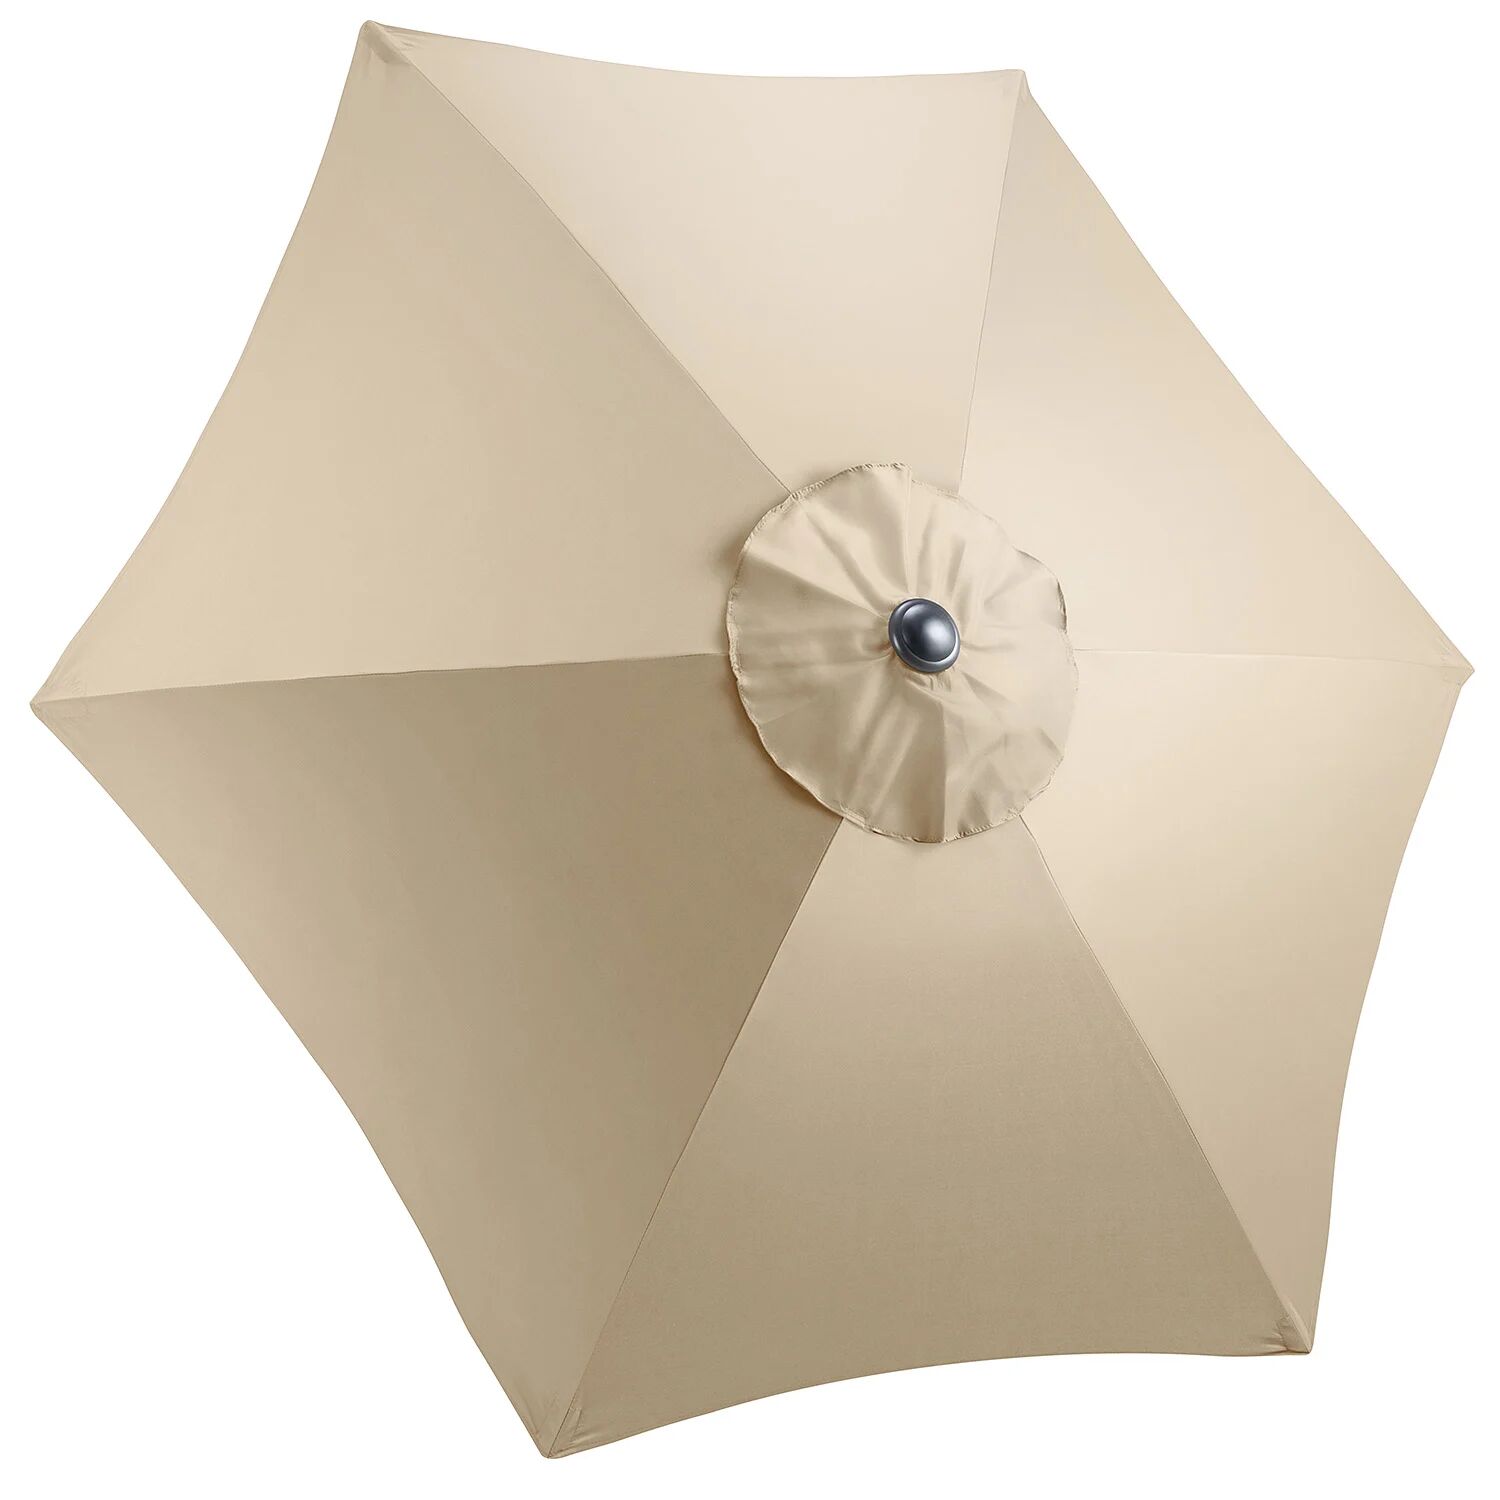 Christow 2m Replacement Parasol Canopy - Taupe